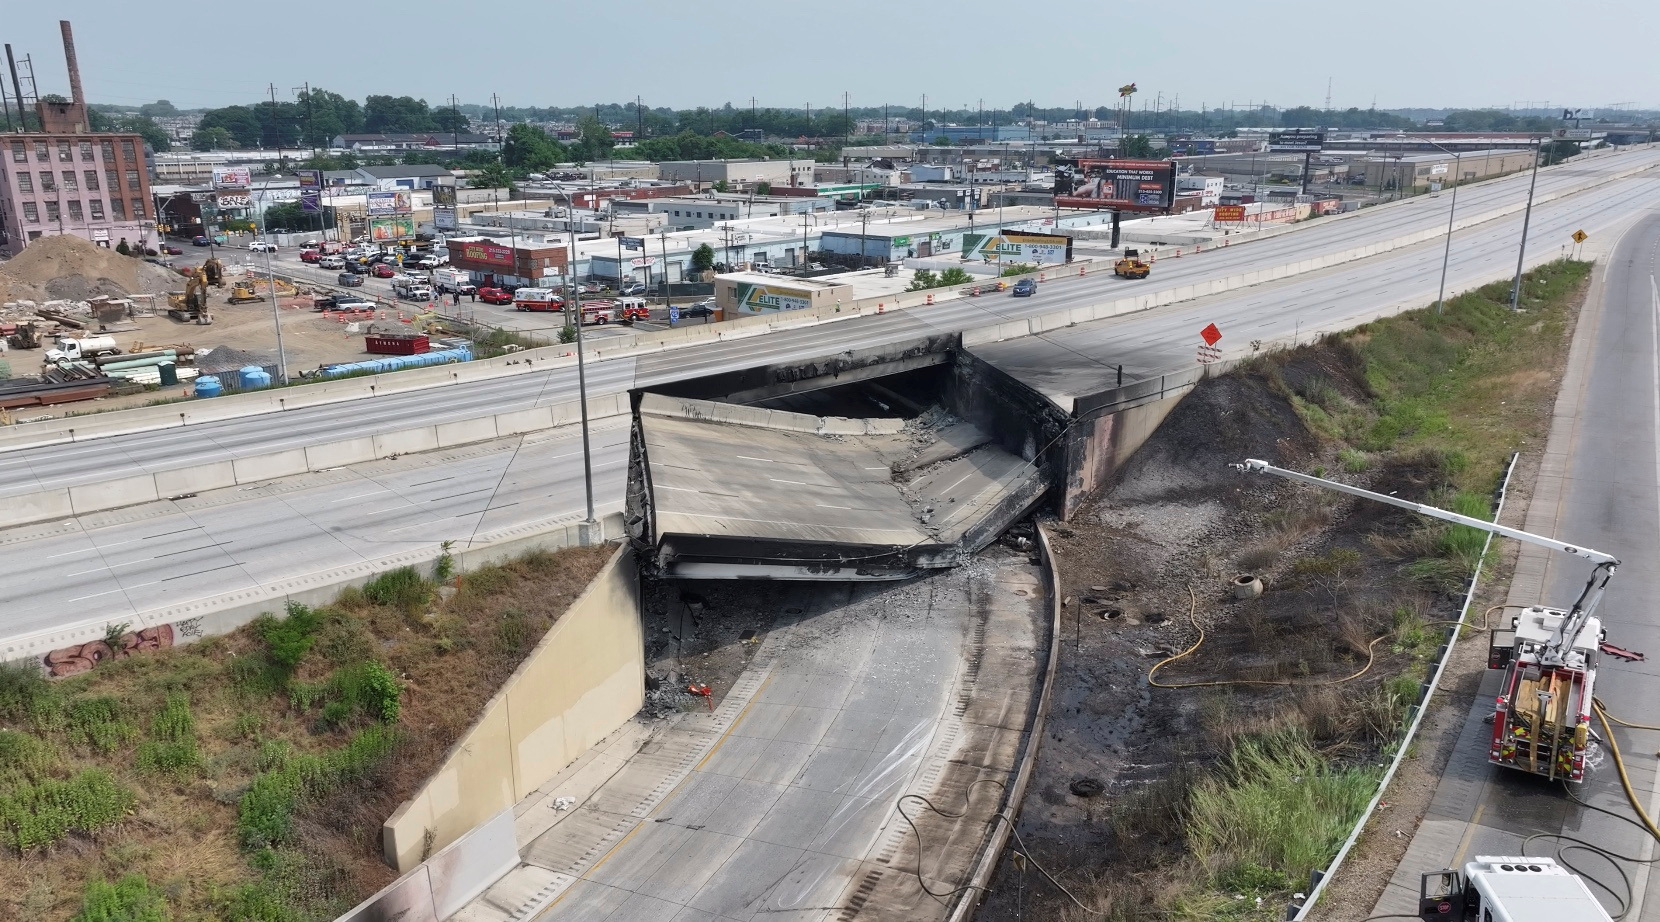 Aftermath of the collapse of I-95 highway after a fuel tanker exploded beneath it, in Philadelphia